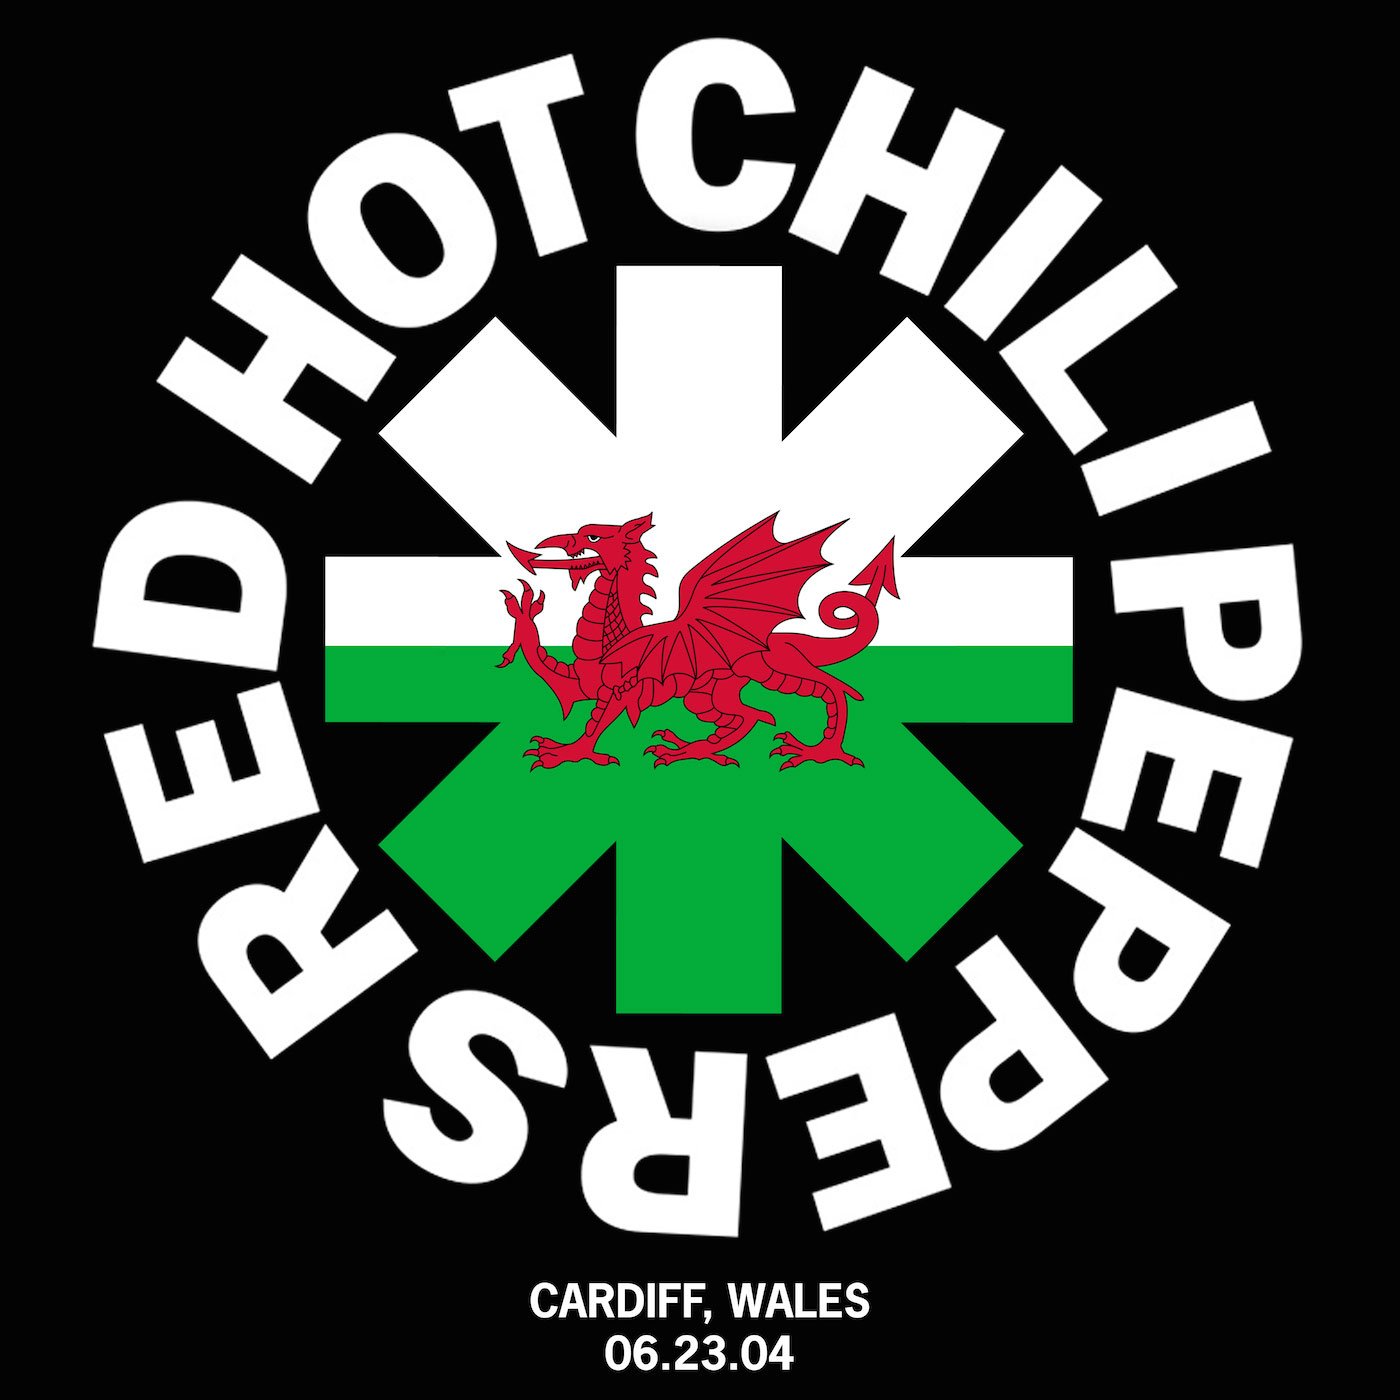 Red hot chili peppers mp3. RHCP Cardiff, Wales: 6/23/04. Кардифф Валес. RHCP 6. Mini RHCP.